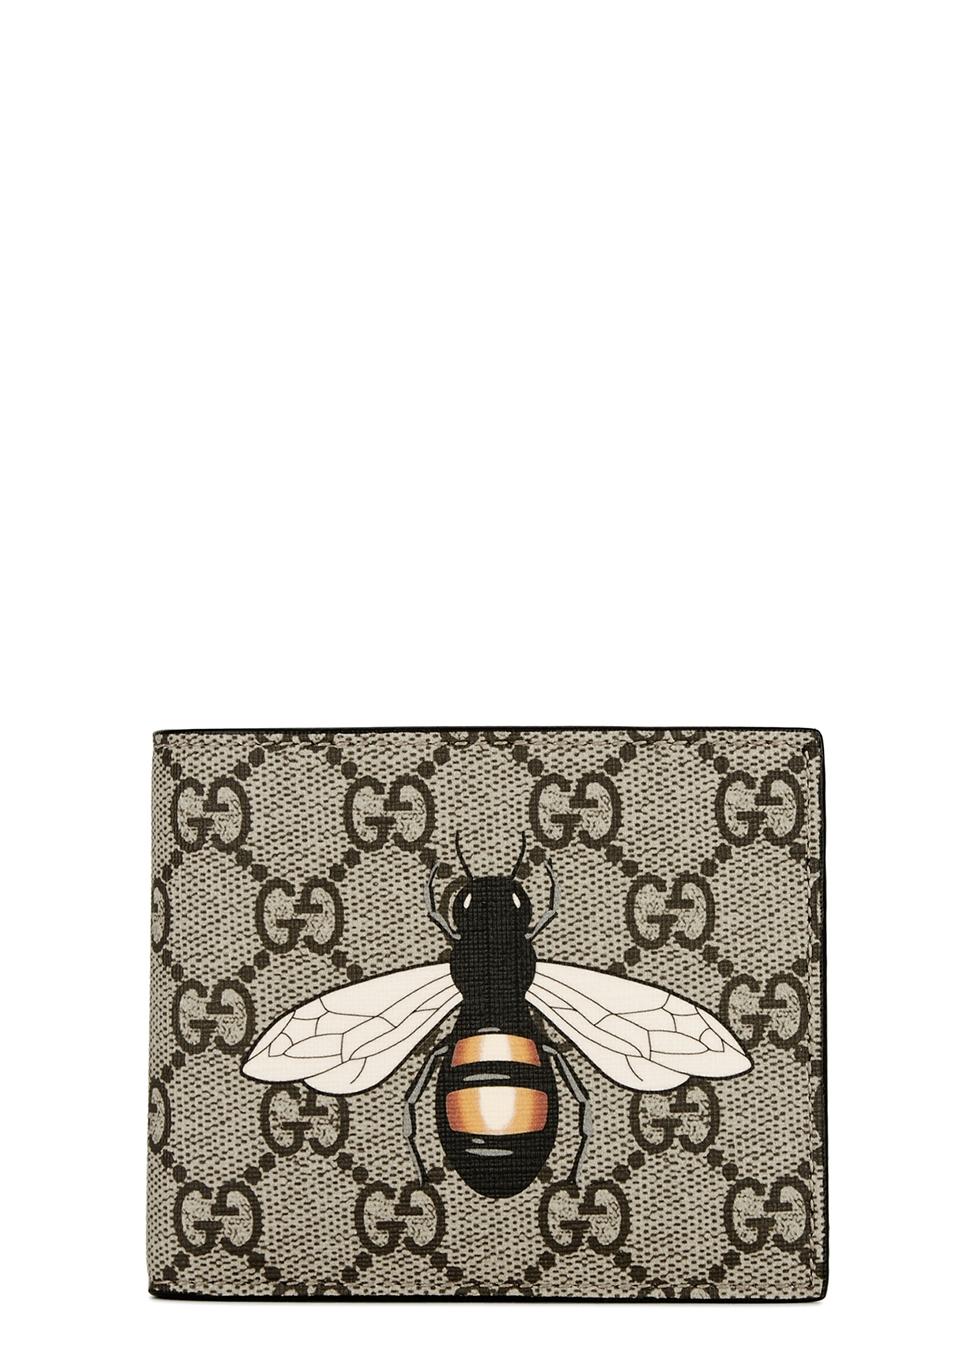 Gucci Bee Print GG Supreme Wallet for Men